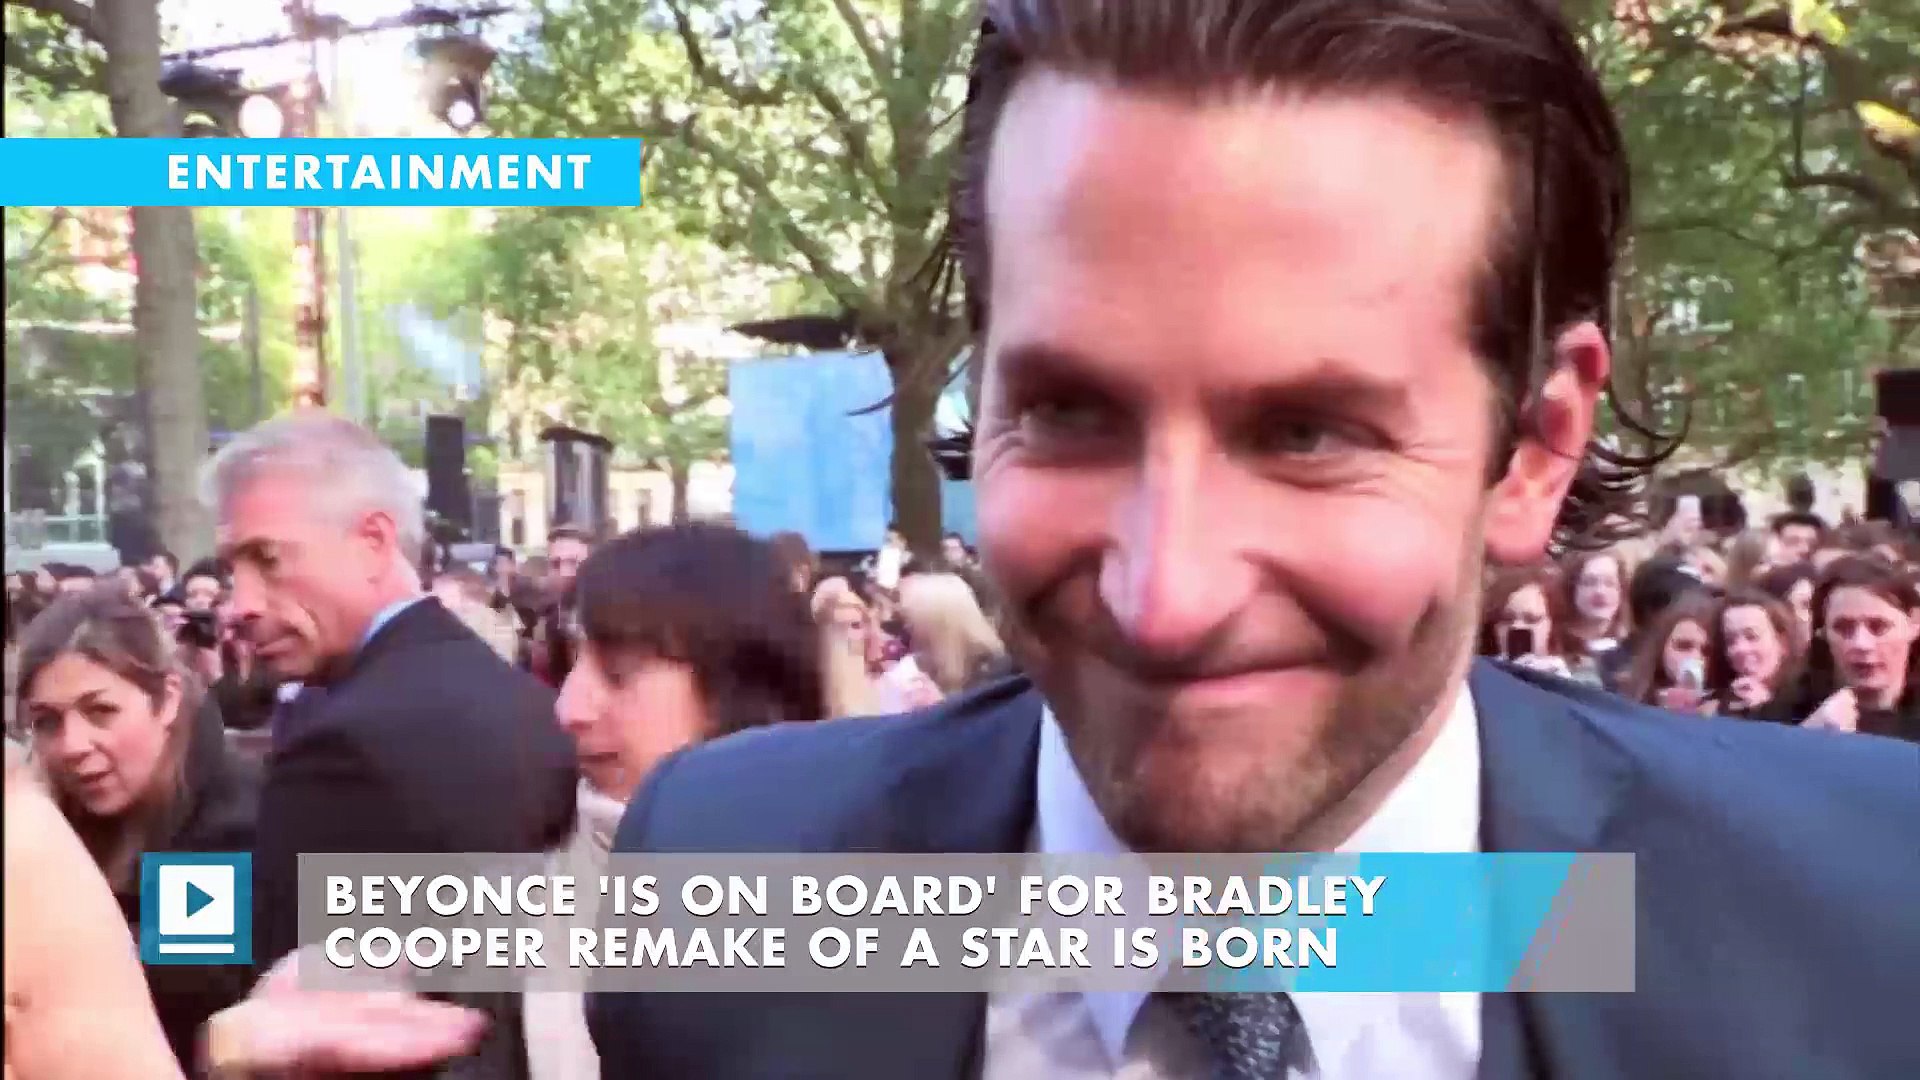 ⁣Beyonce 'is on board' for Bradley Cooper remake of A Star Is Born